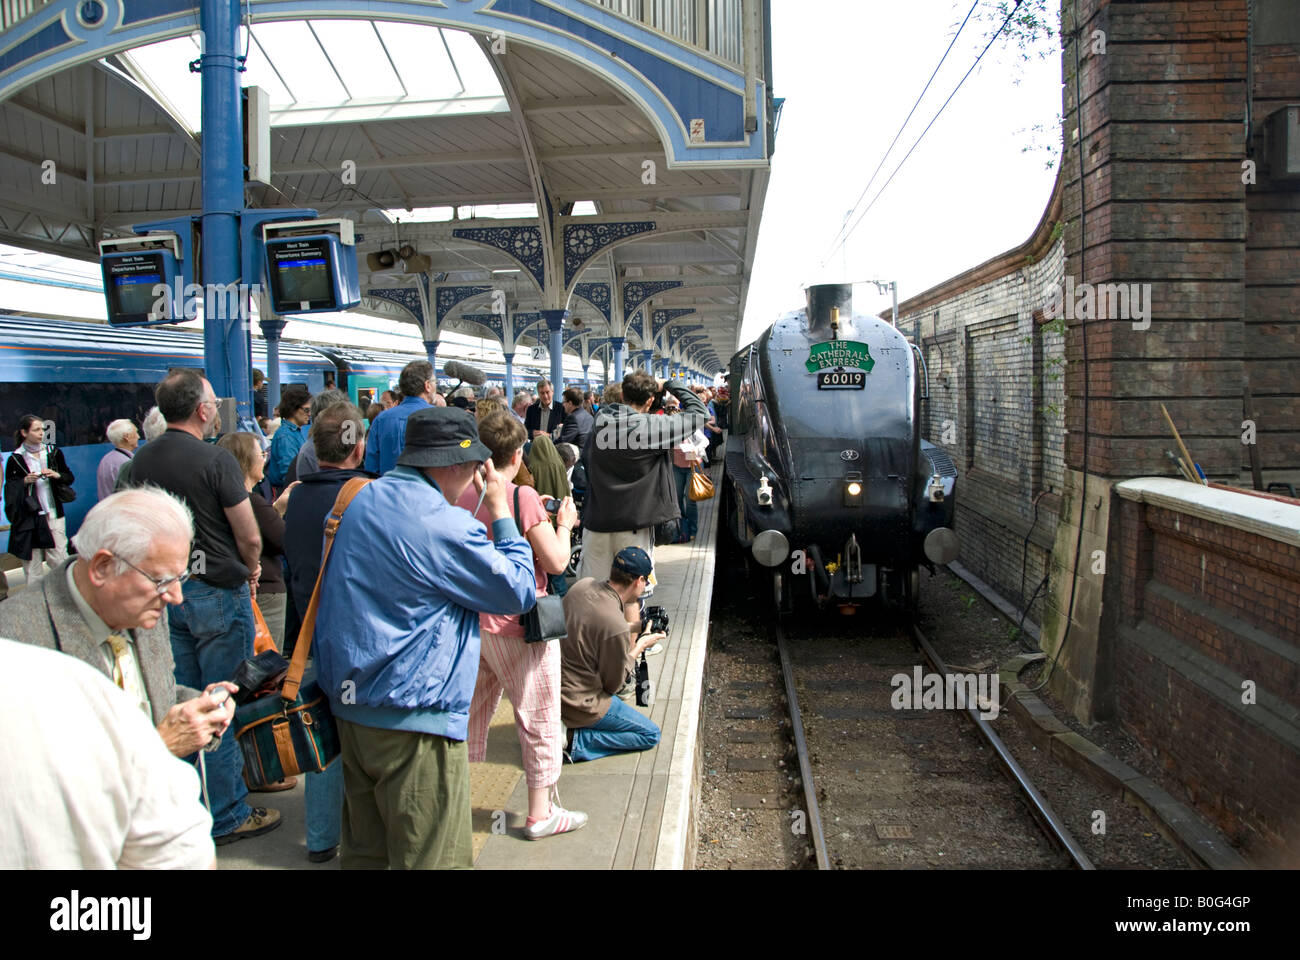 Railway enthusiasts photograph A4 pacific 'Bittern' steam locomotive at Norwich Railway Station. Stock Photo